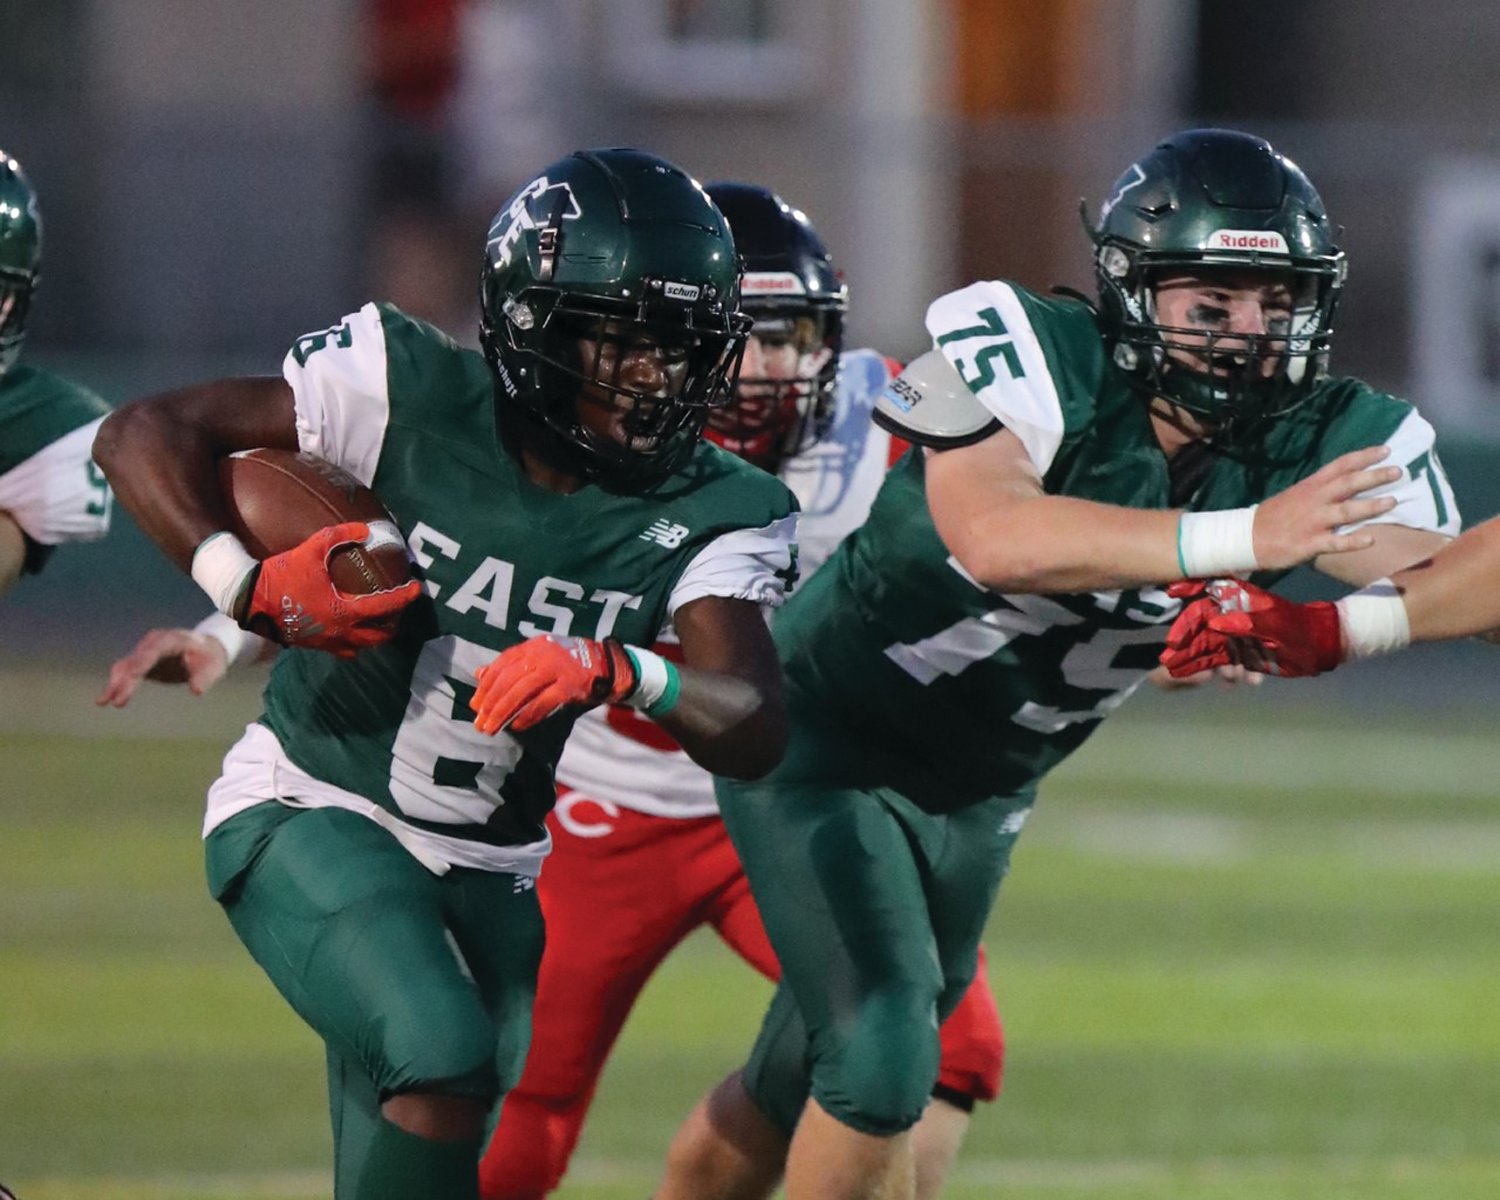 UP THE GUT: Cranston East’s A’driahn Foreman picks up some yards alongside Thomas Roche.